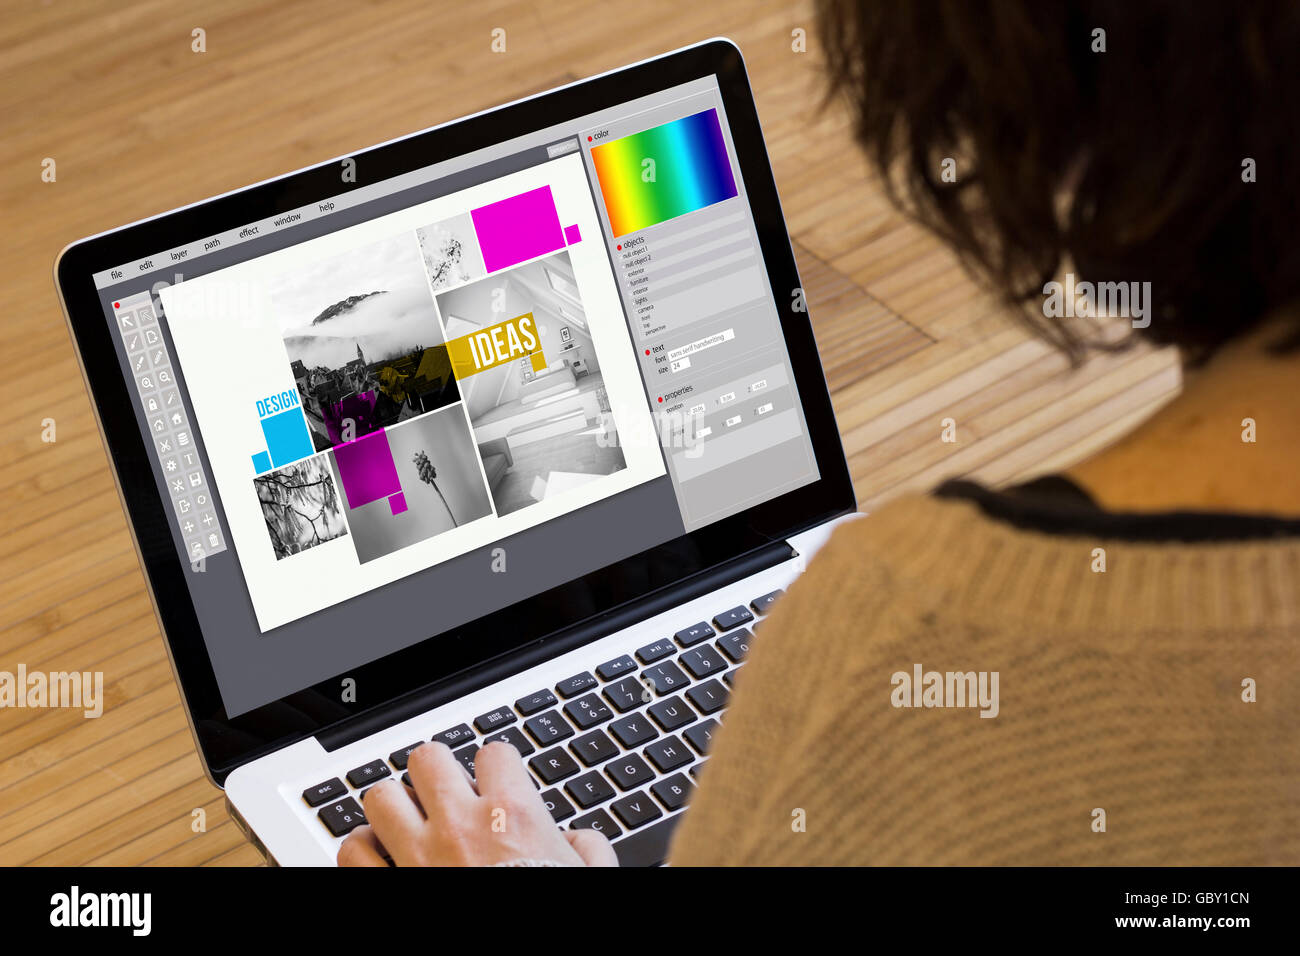 graphic design concept: design layout on a laptop screen. Screen graphics are made up. Stock Photo